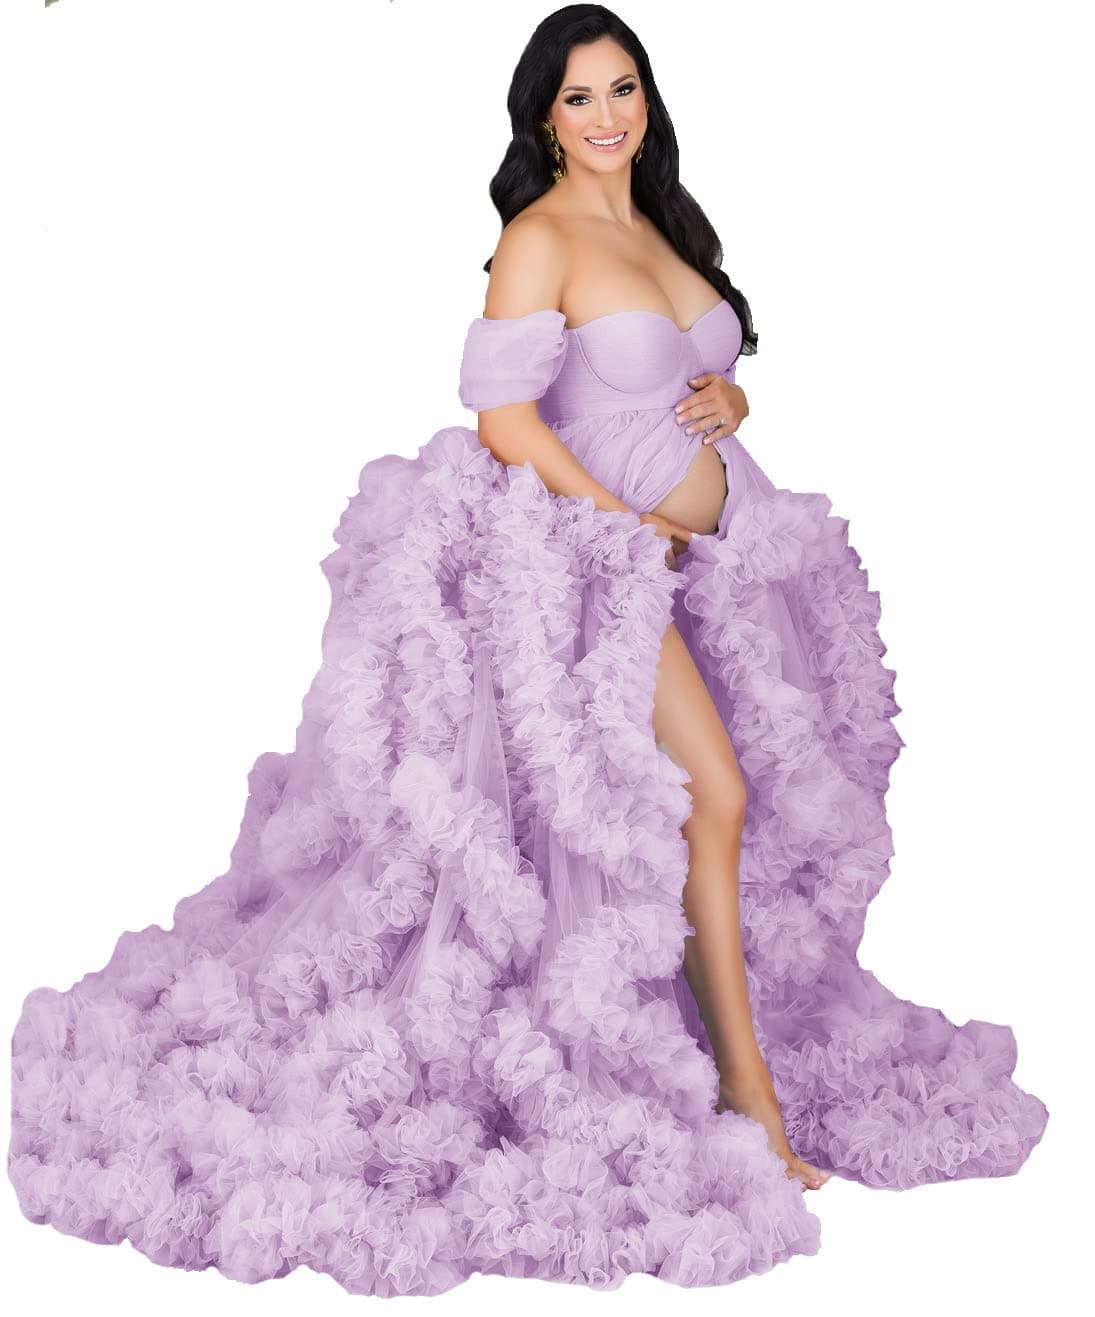 Custom Made White Maternity Puffy Sleeve Prom Dress With Ruffles And Floor  Length Undergarments For Pregnancy Photo Shooting And Sleepwear From  Manweisi, $83.46